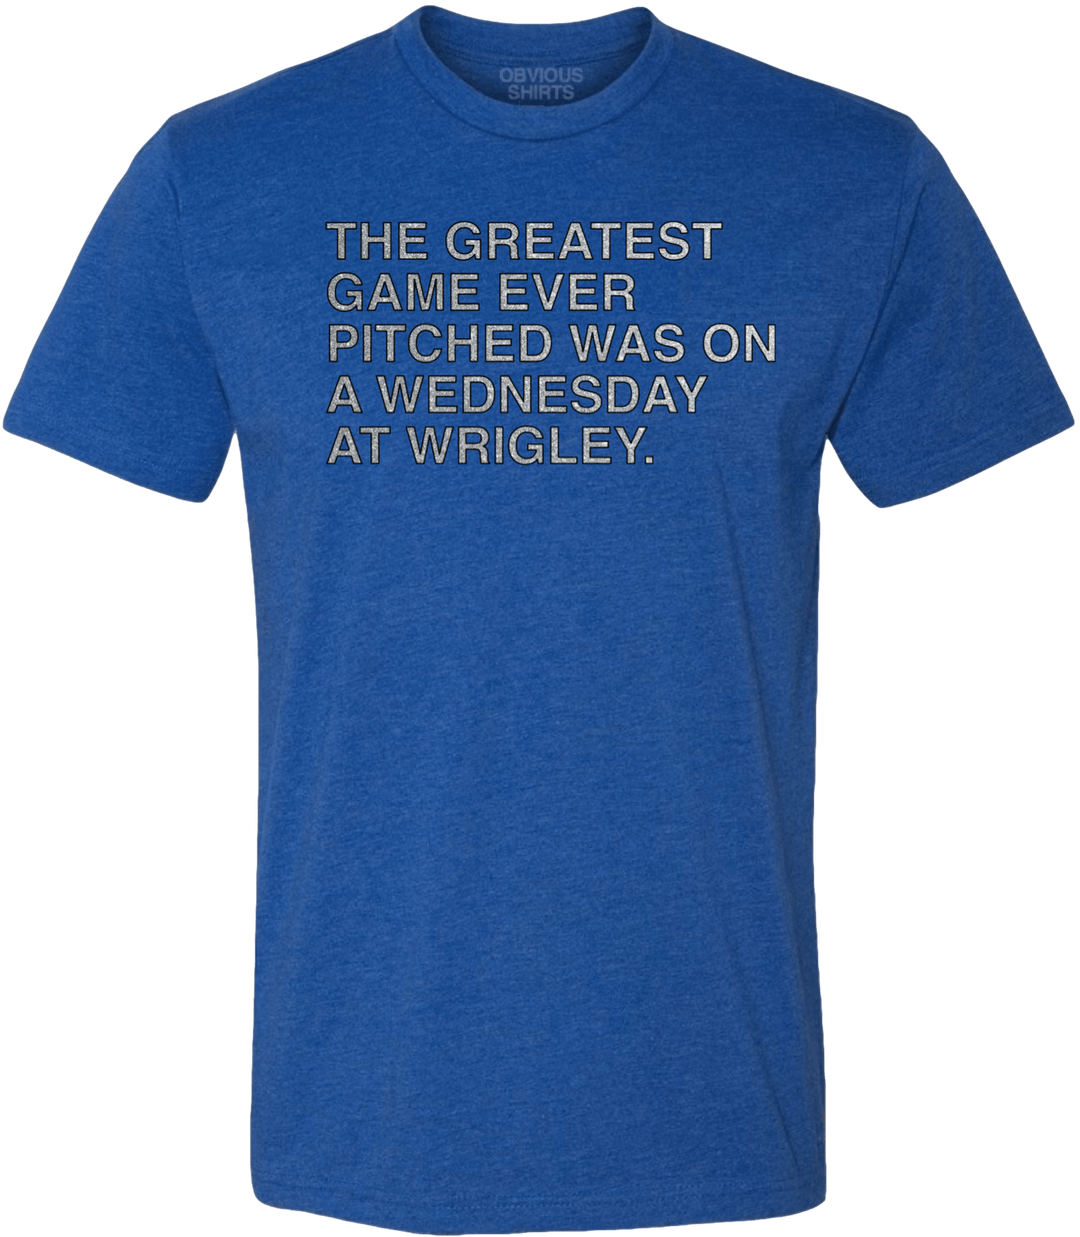 THE GREATEST GAME EVER PITCHED. (ANNIVERSARY EDITION) - OBVIOUS SHIRTS